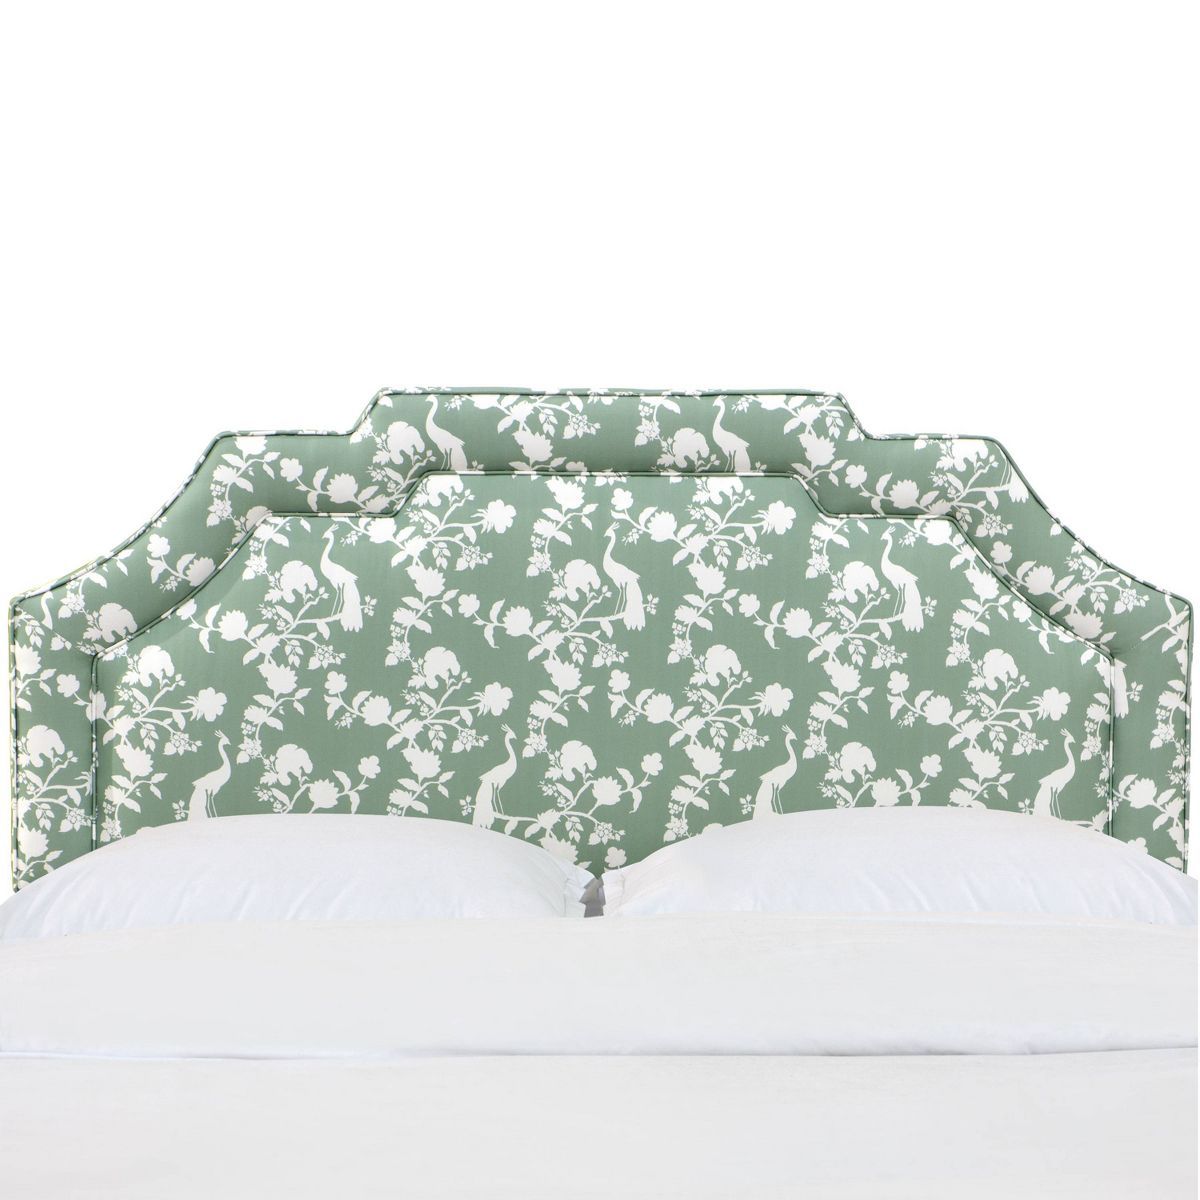 Skyline Furniture Queen Ever Notched Border Headboard in Patterns Peacock Silhouette Green | Target